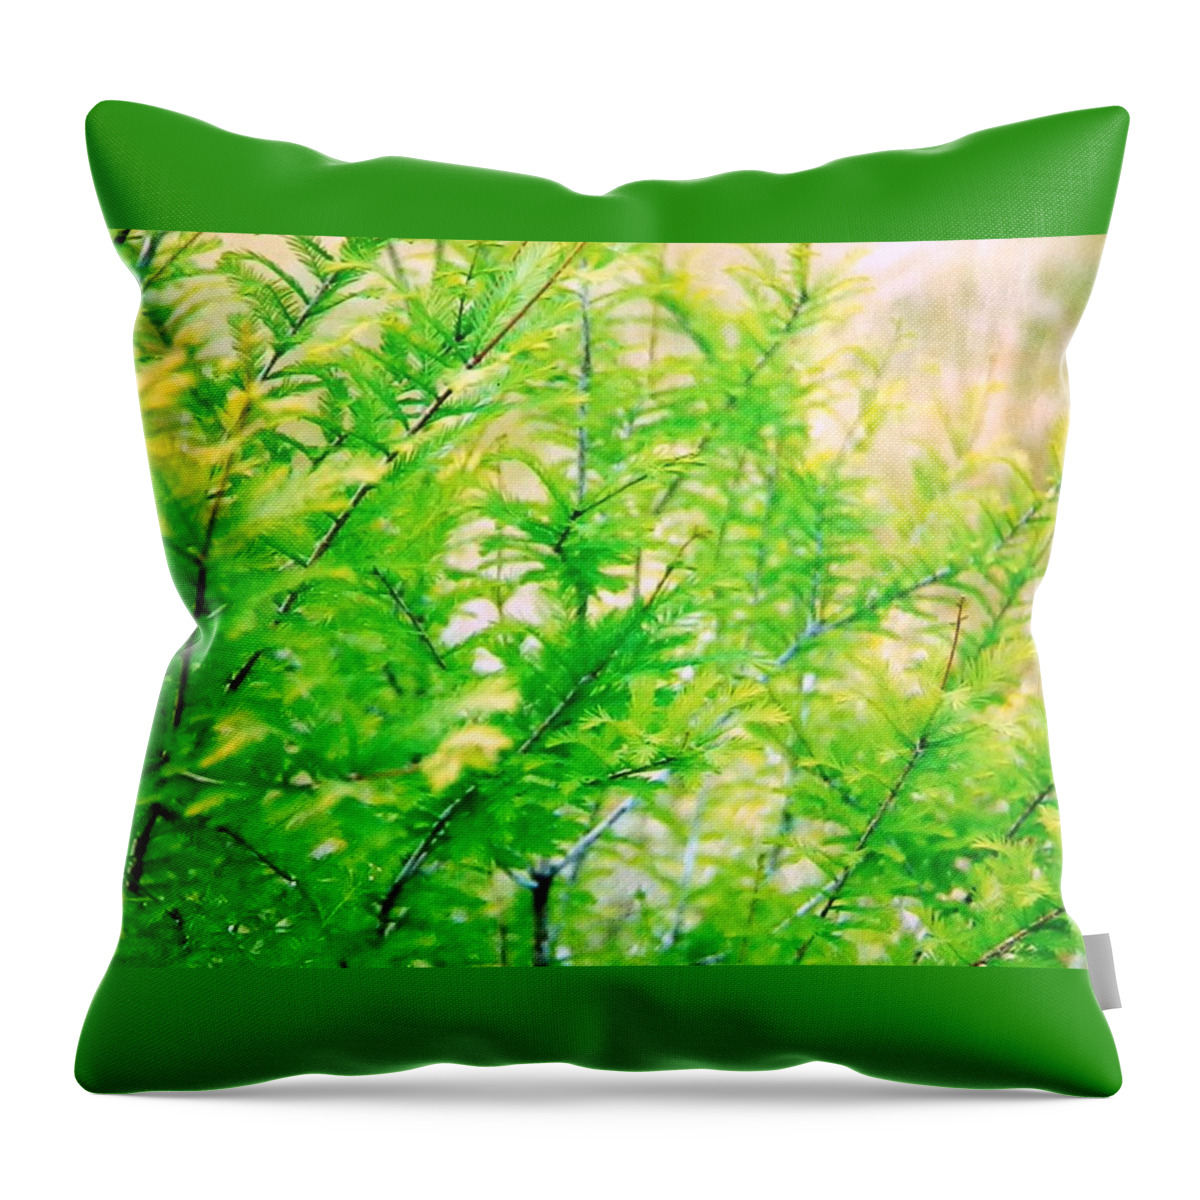 Lovely Bright Throw Pillow featuring the photograph Spring Cypress Beauty by Belinda Lee